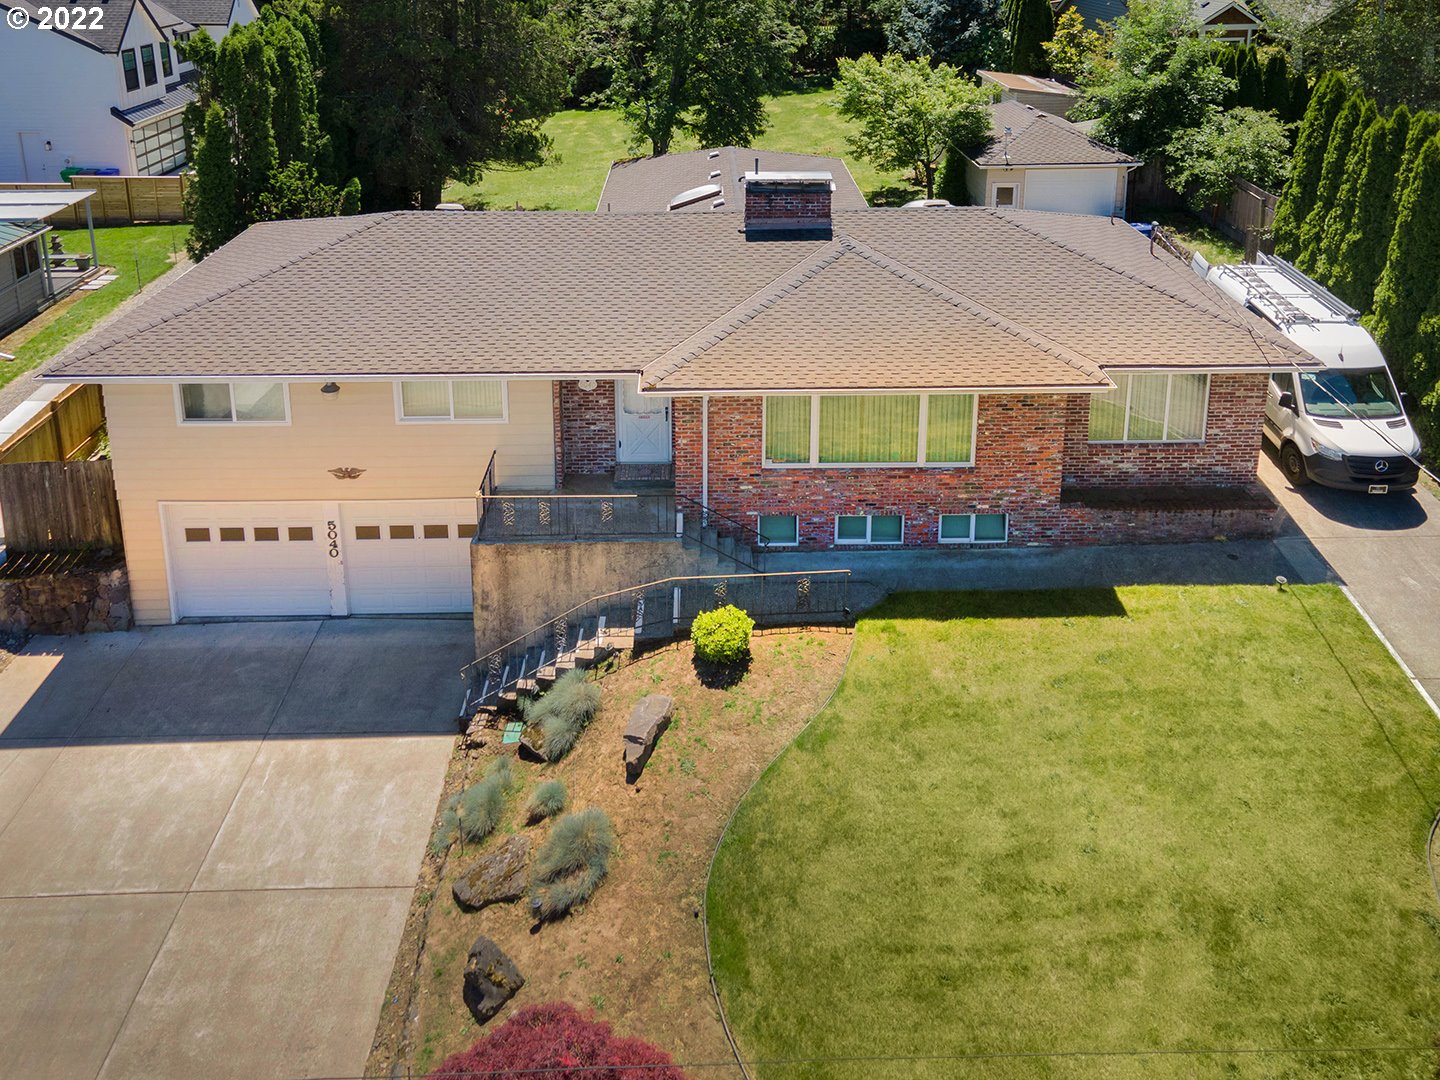 a aerial view of a house with swimming pool yard and patio